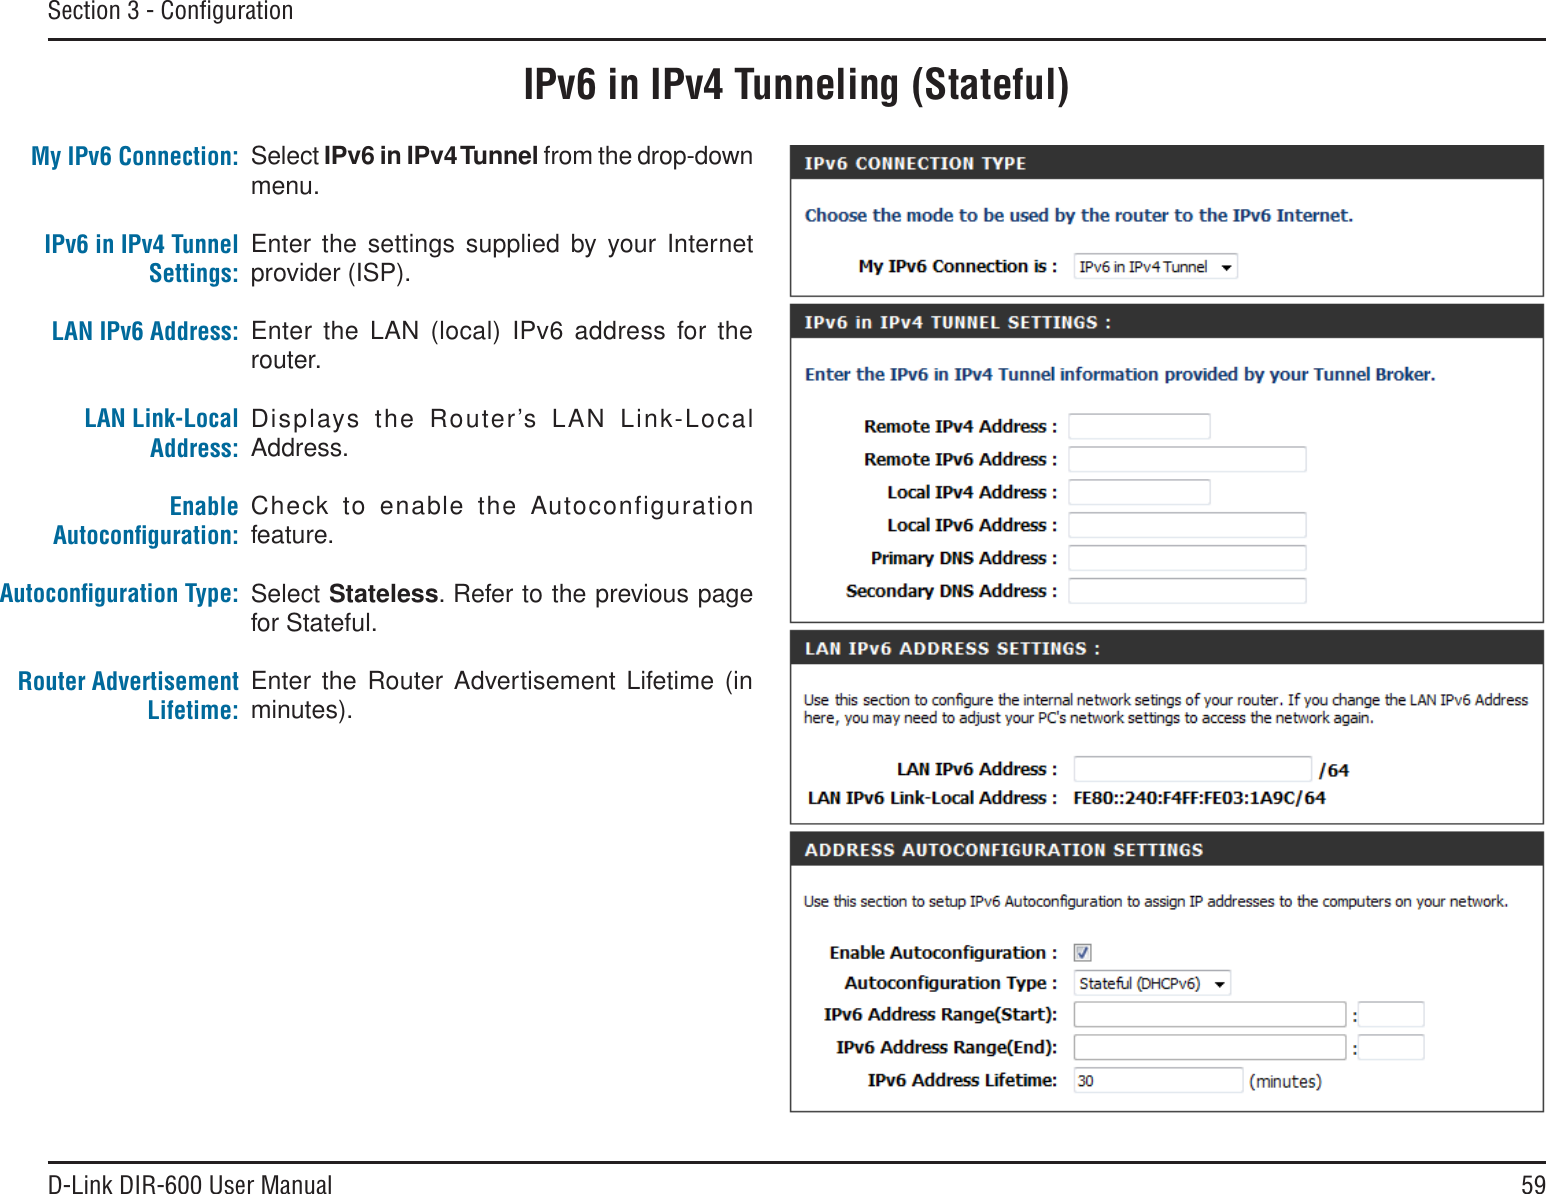 59D-Link DIR-600 User ManualSection 3 - ConﬁgurationIPv6 in IPv4 Tunneling (Stateful)Select IPv6 in IPv4Tunnel from the drop-down menu.Enter the settings supplied by your Internet provider (ISP). Enter the LAN (local) IPv6 address for the router. Displays the Router’s LAN Link-Local Address.Check to enable the Autoconfiguration feature.Select Stateless. Refer to the previous page for Stateful.Enter the Router Advertisement Lifetime (in minutes).My IPv6 Connection:IPv6 in IPv4 Tunnel Settings:LAN IPv6 Address:LAN Link-Local Address:EnableAutoconﬁguration:Autoconﬁguration Type:Router Advertisement Lifetime: